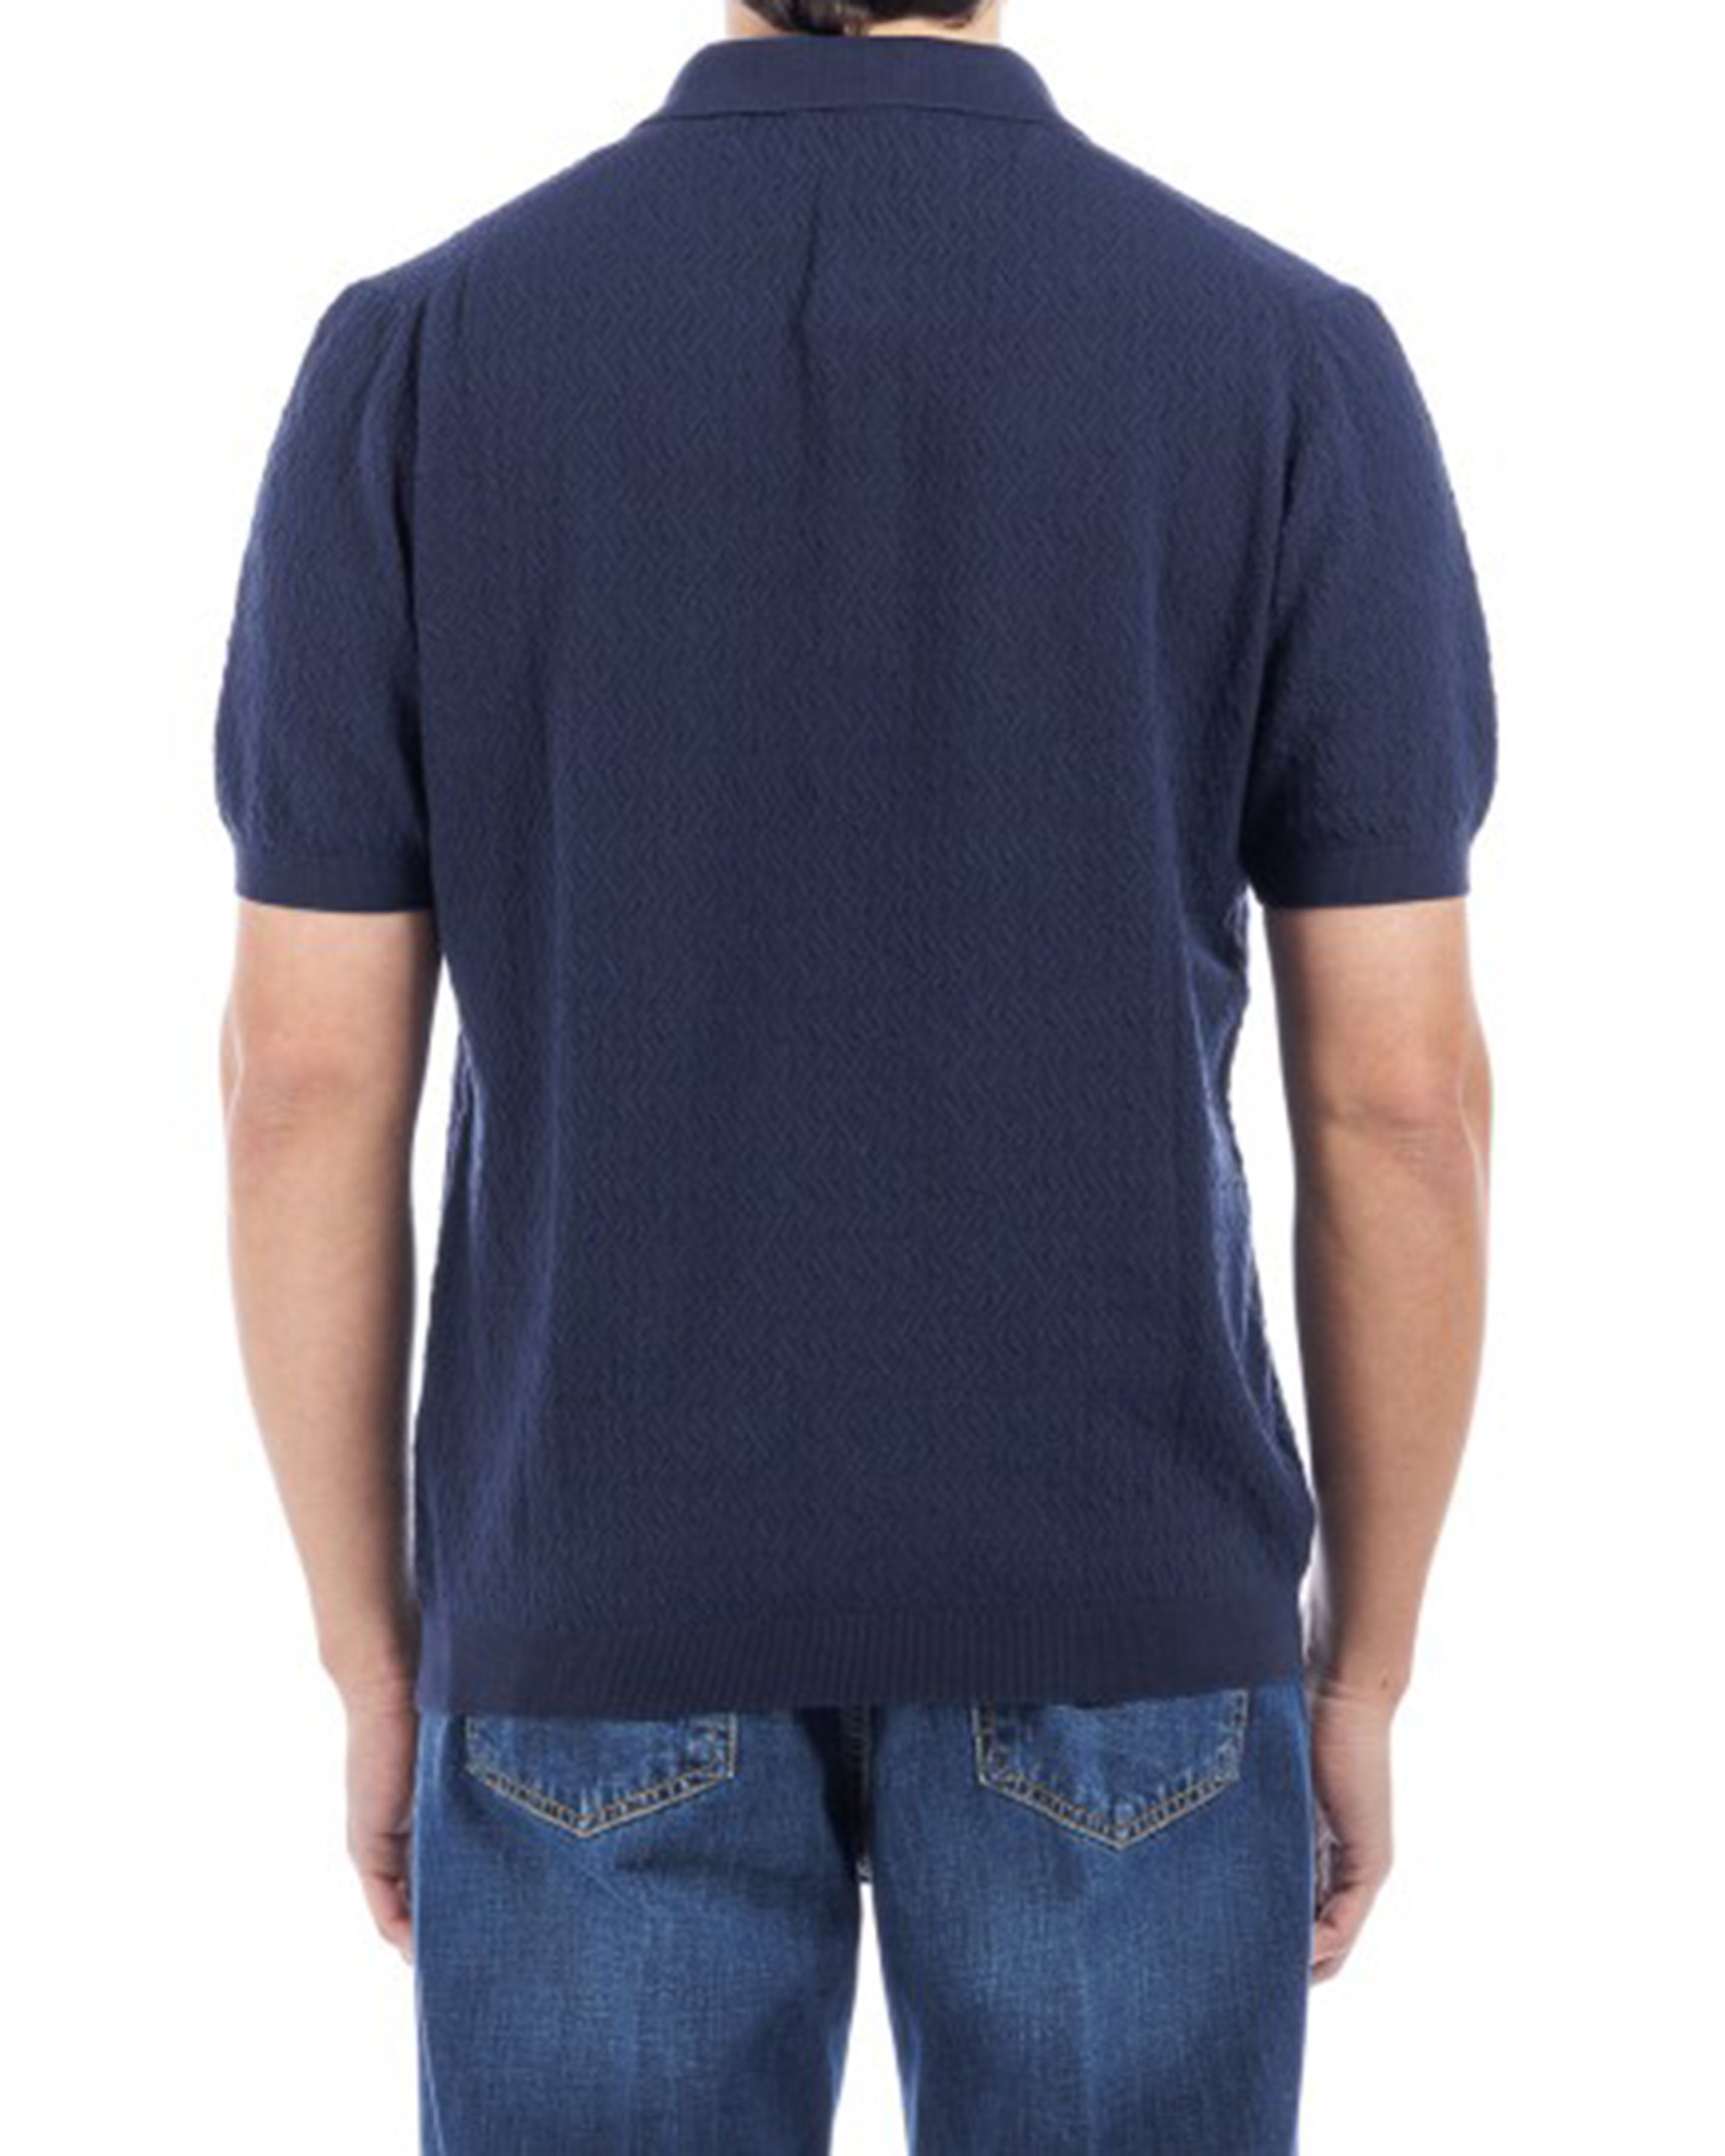 CIRCOLO 1901 - CN3991 Patterned Knitted Polo Shirt in Indigo Dark Blue